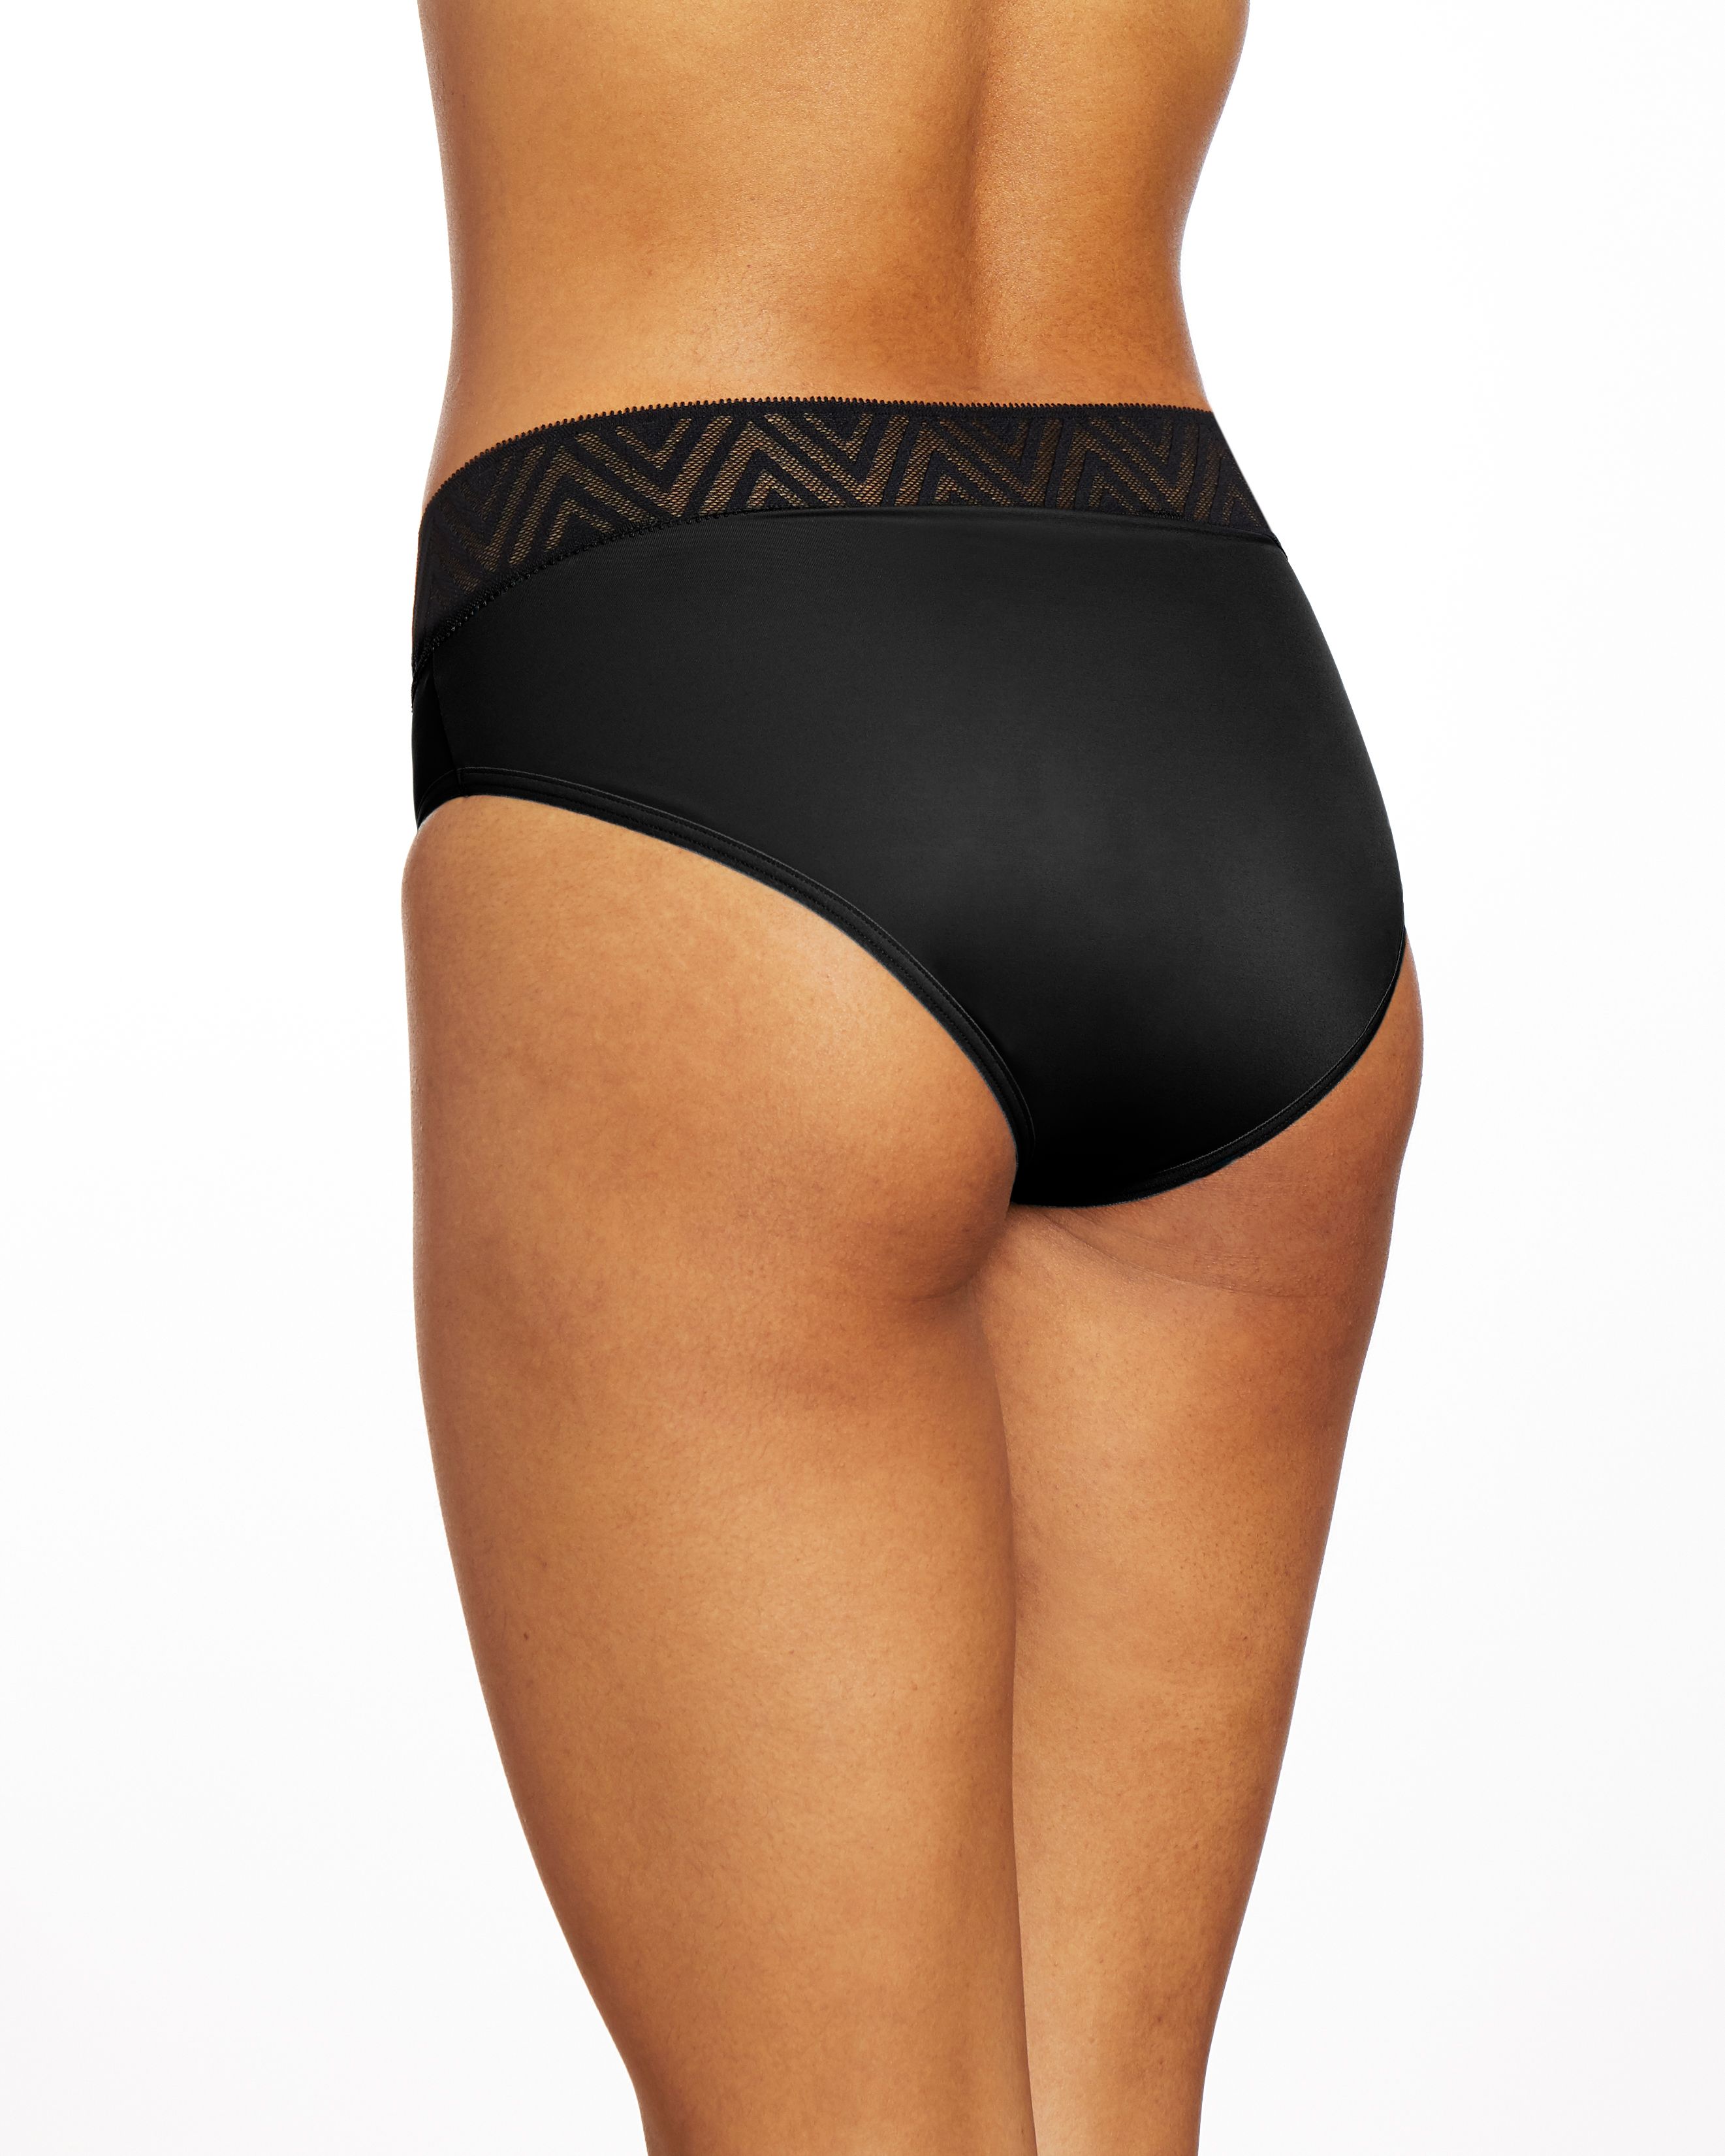 DISCThinx Period Proof Hiphugger Black - XS (New Geo Lace)